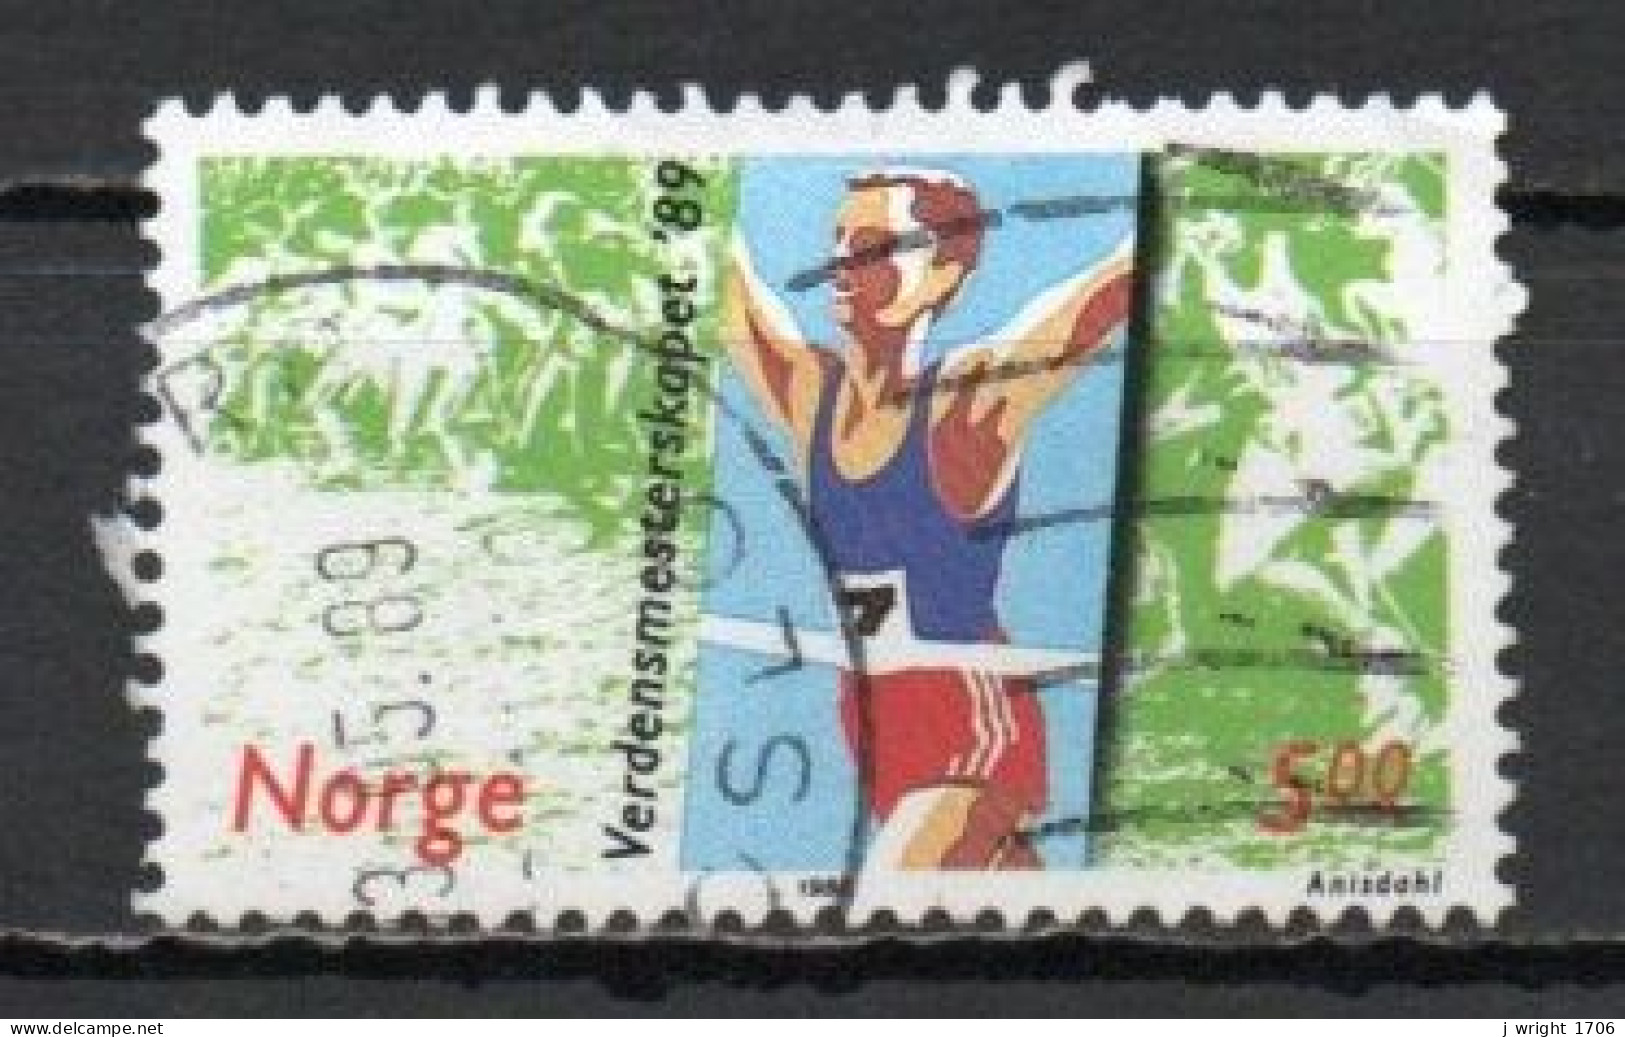 Norway, 1989, World Cross Country Championships, 5kr, USED - Used Stamps